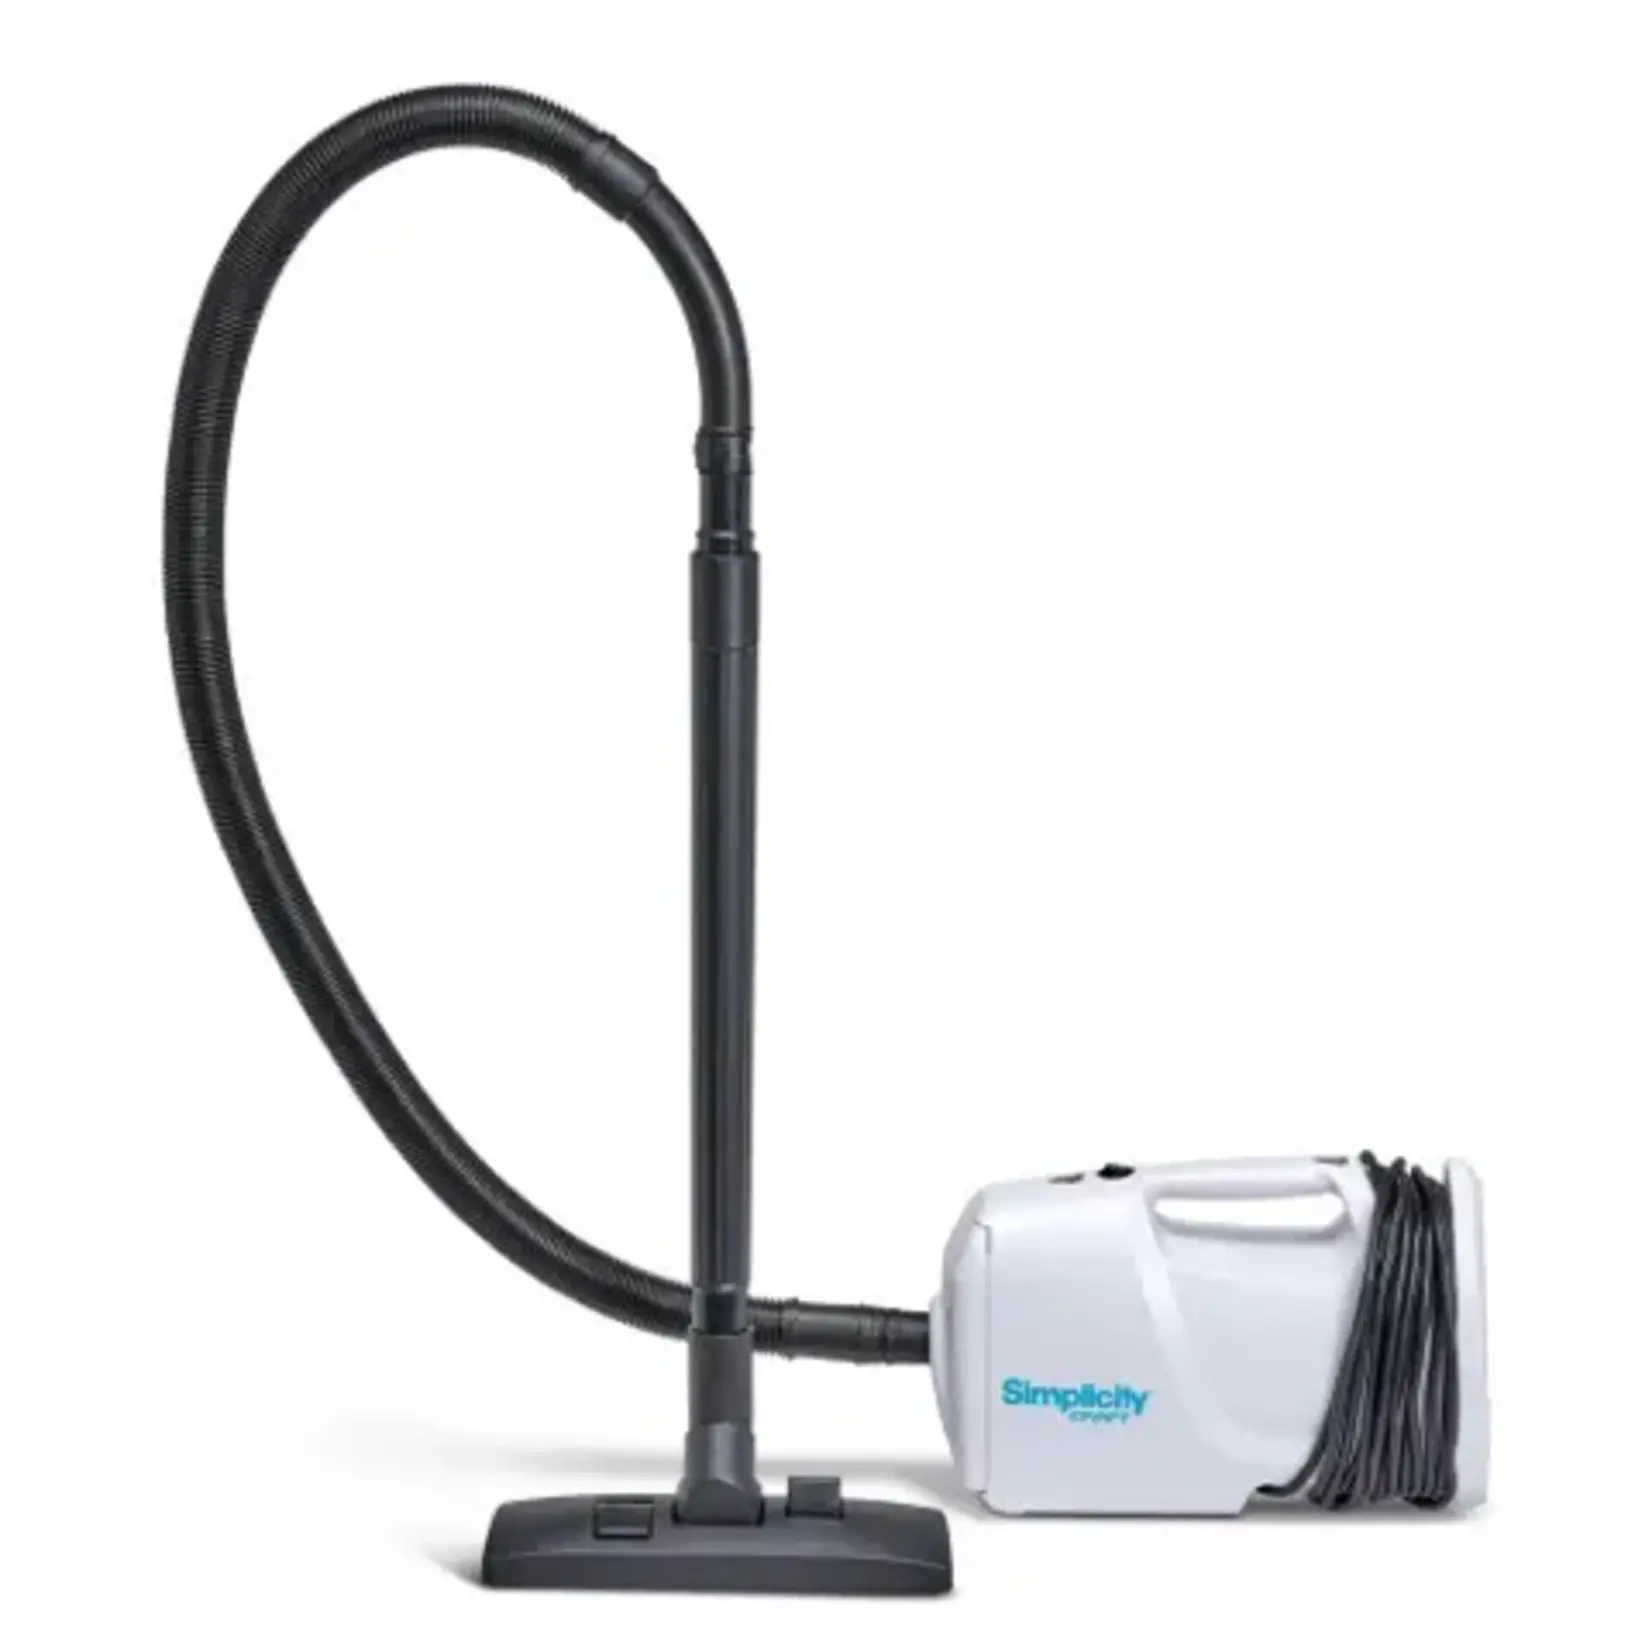 Simplicity Simplicity Sport Portable Canister Vacuum - S100.4